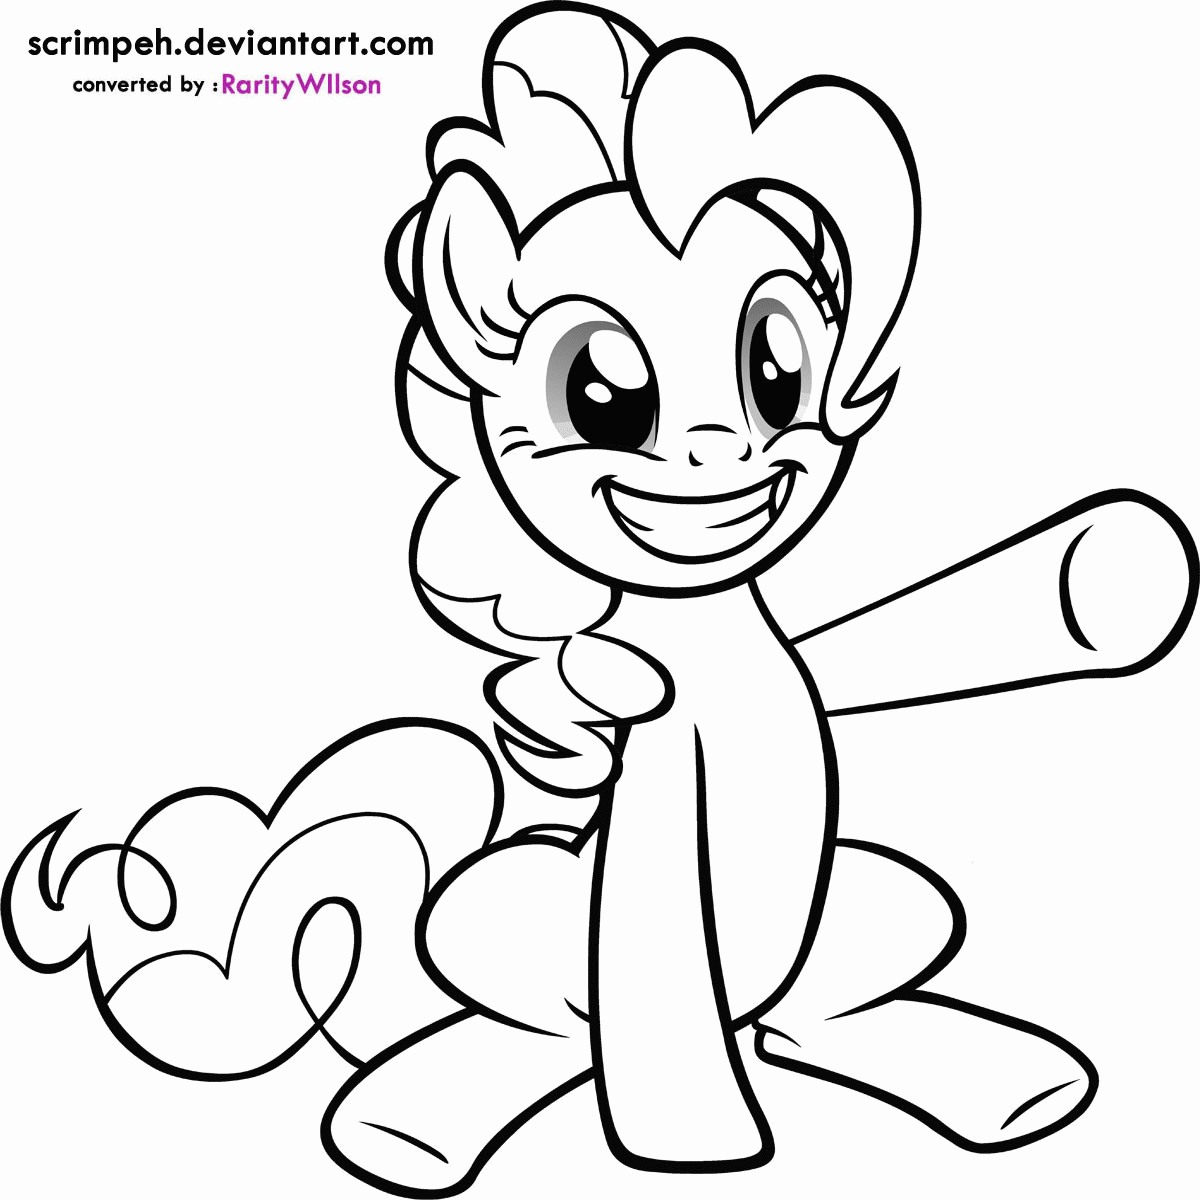 15 Pics of Apple Pie My Little Pony Coloring Pages - My Little ...